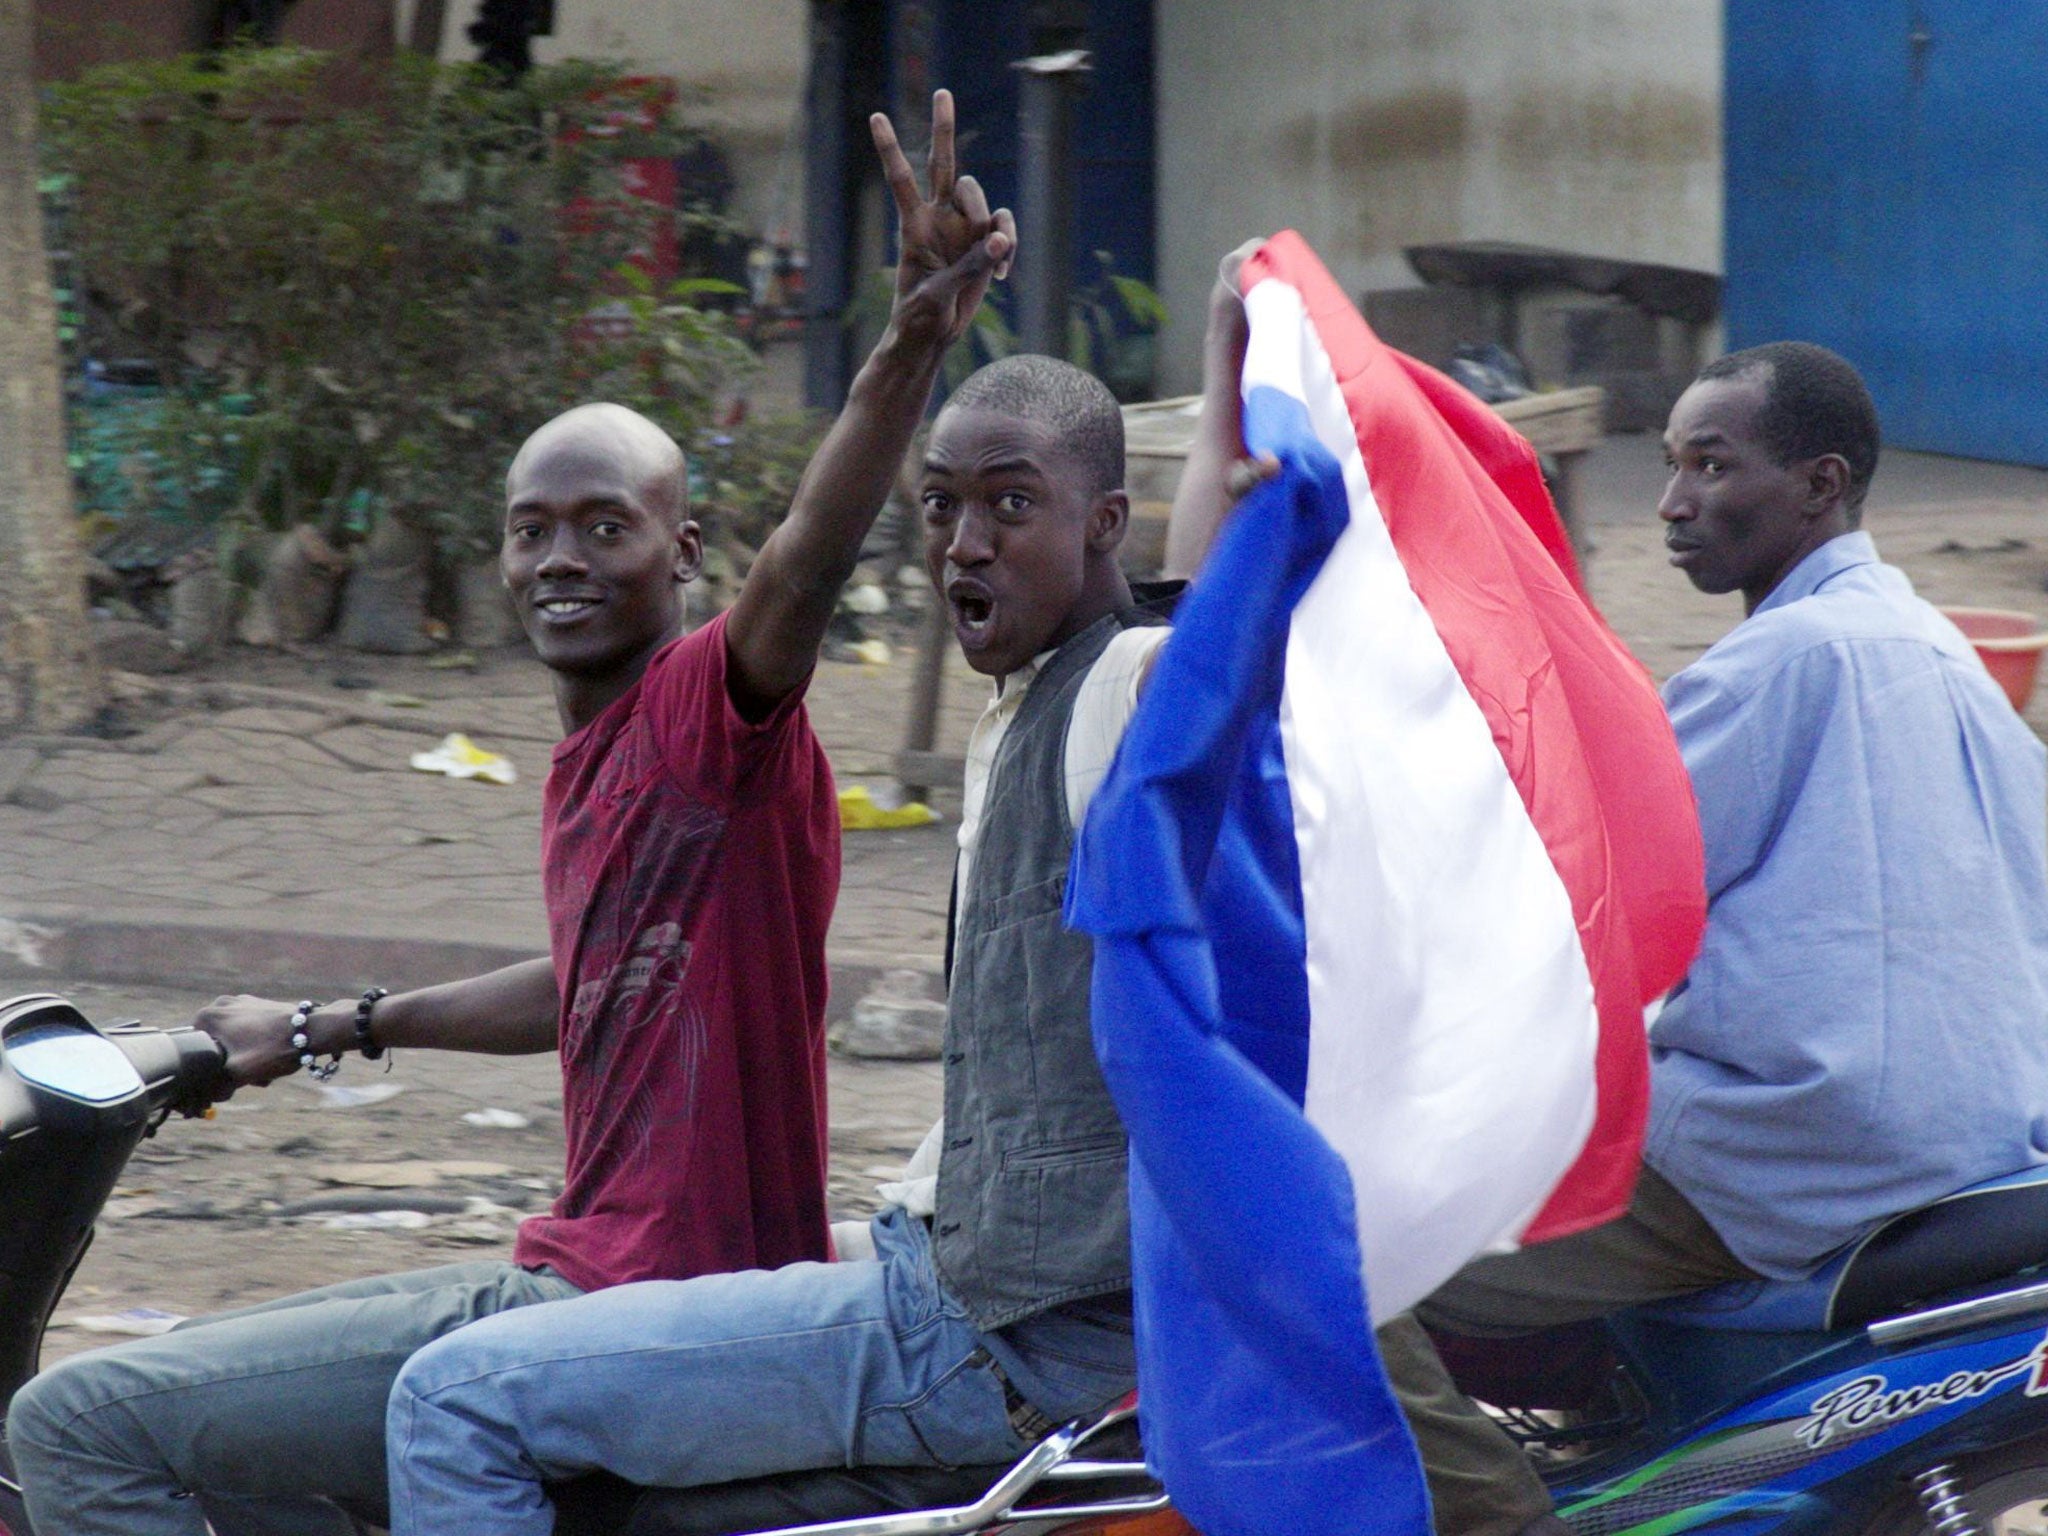 Inhabitants of Bamako, the capital of Mali, wave a French flag following the military intervention